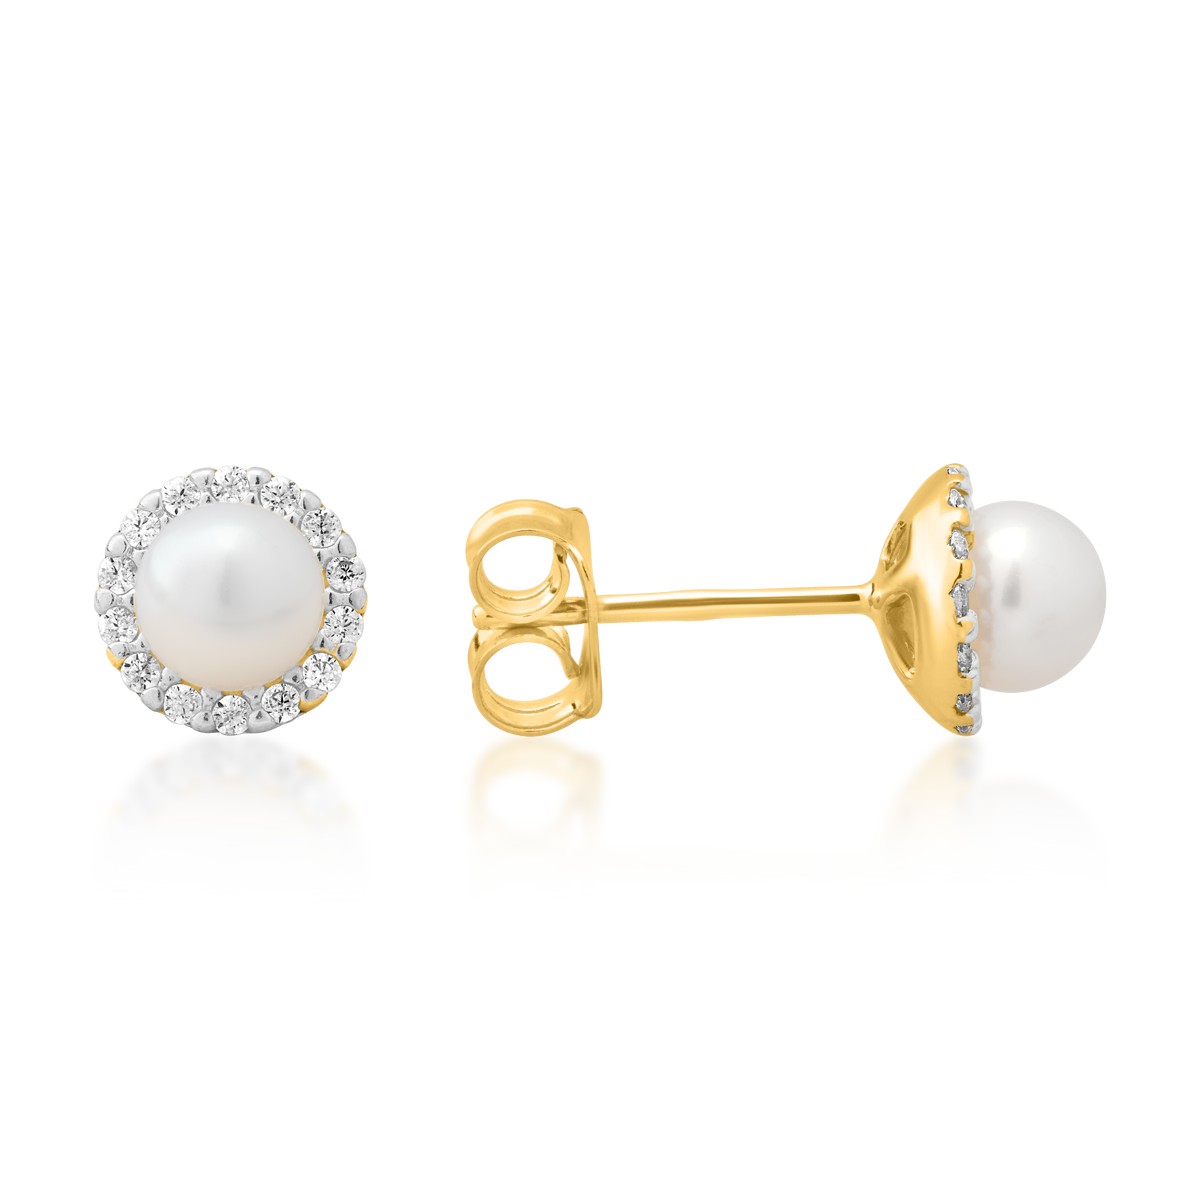 Yellow gold minimalist earrings with synthetic pearls and zirconia